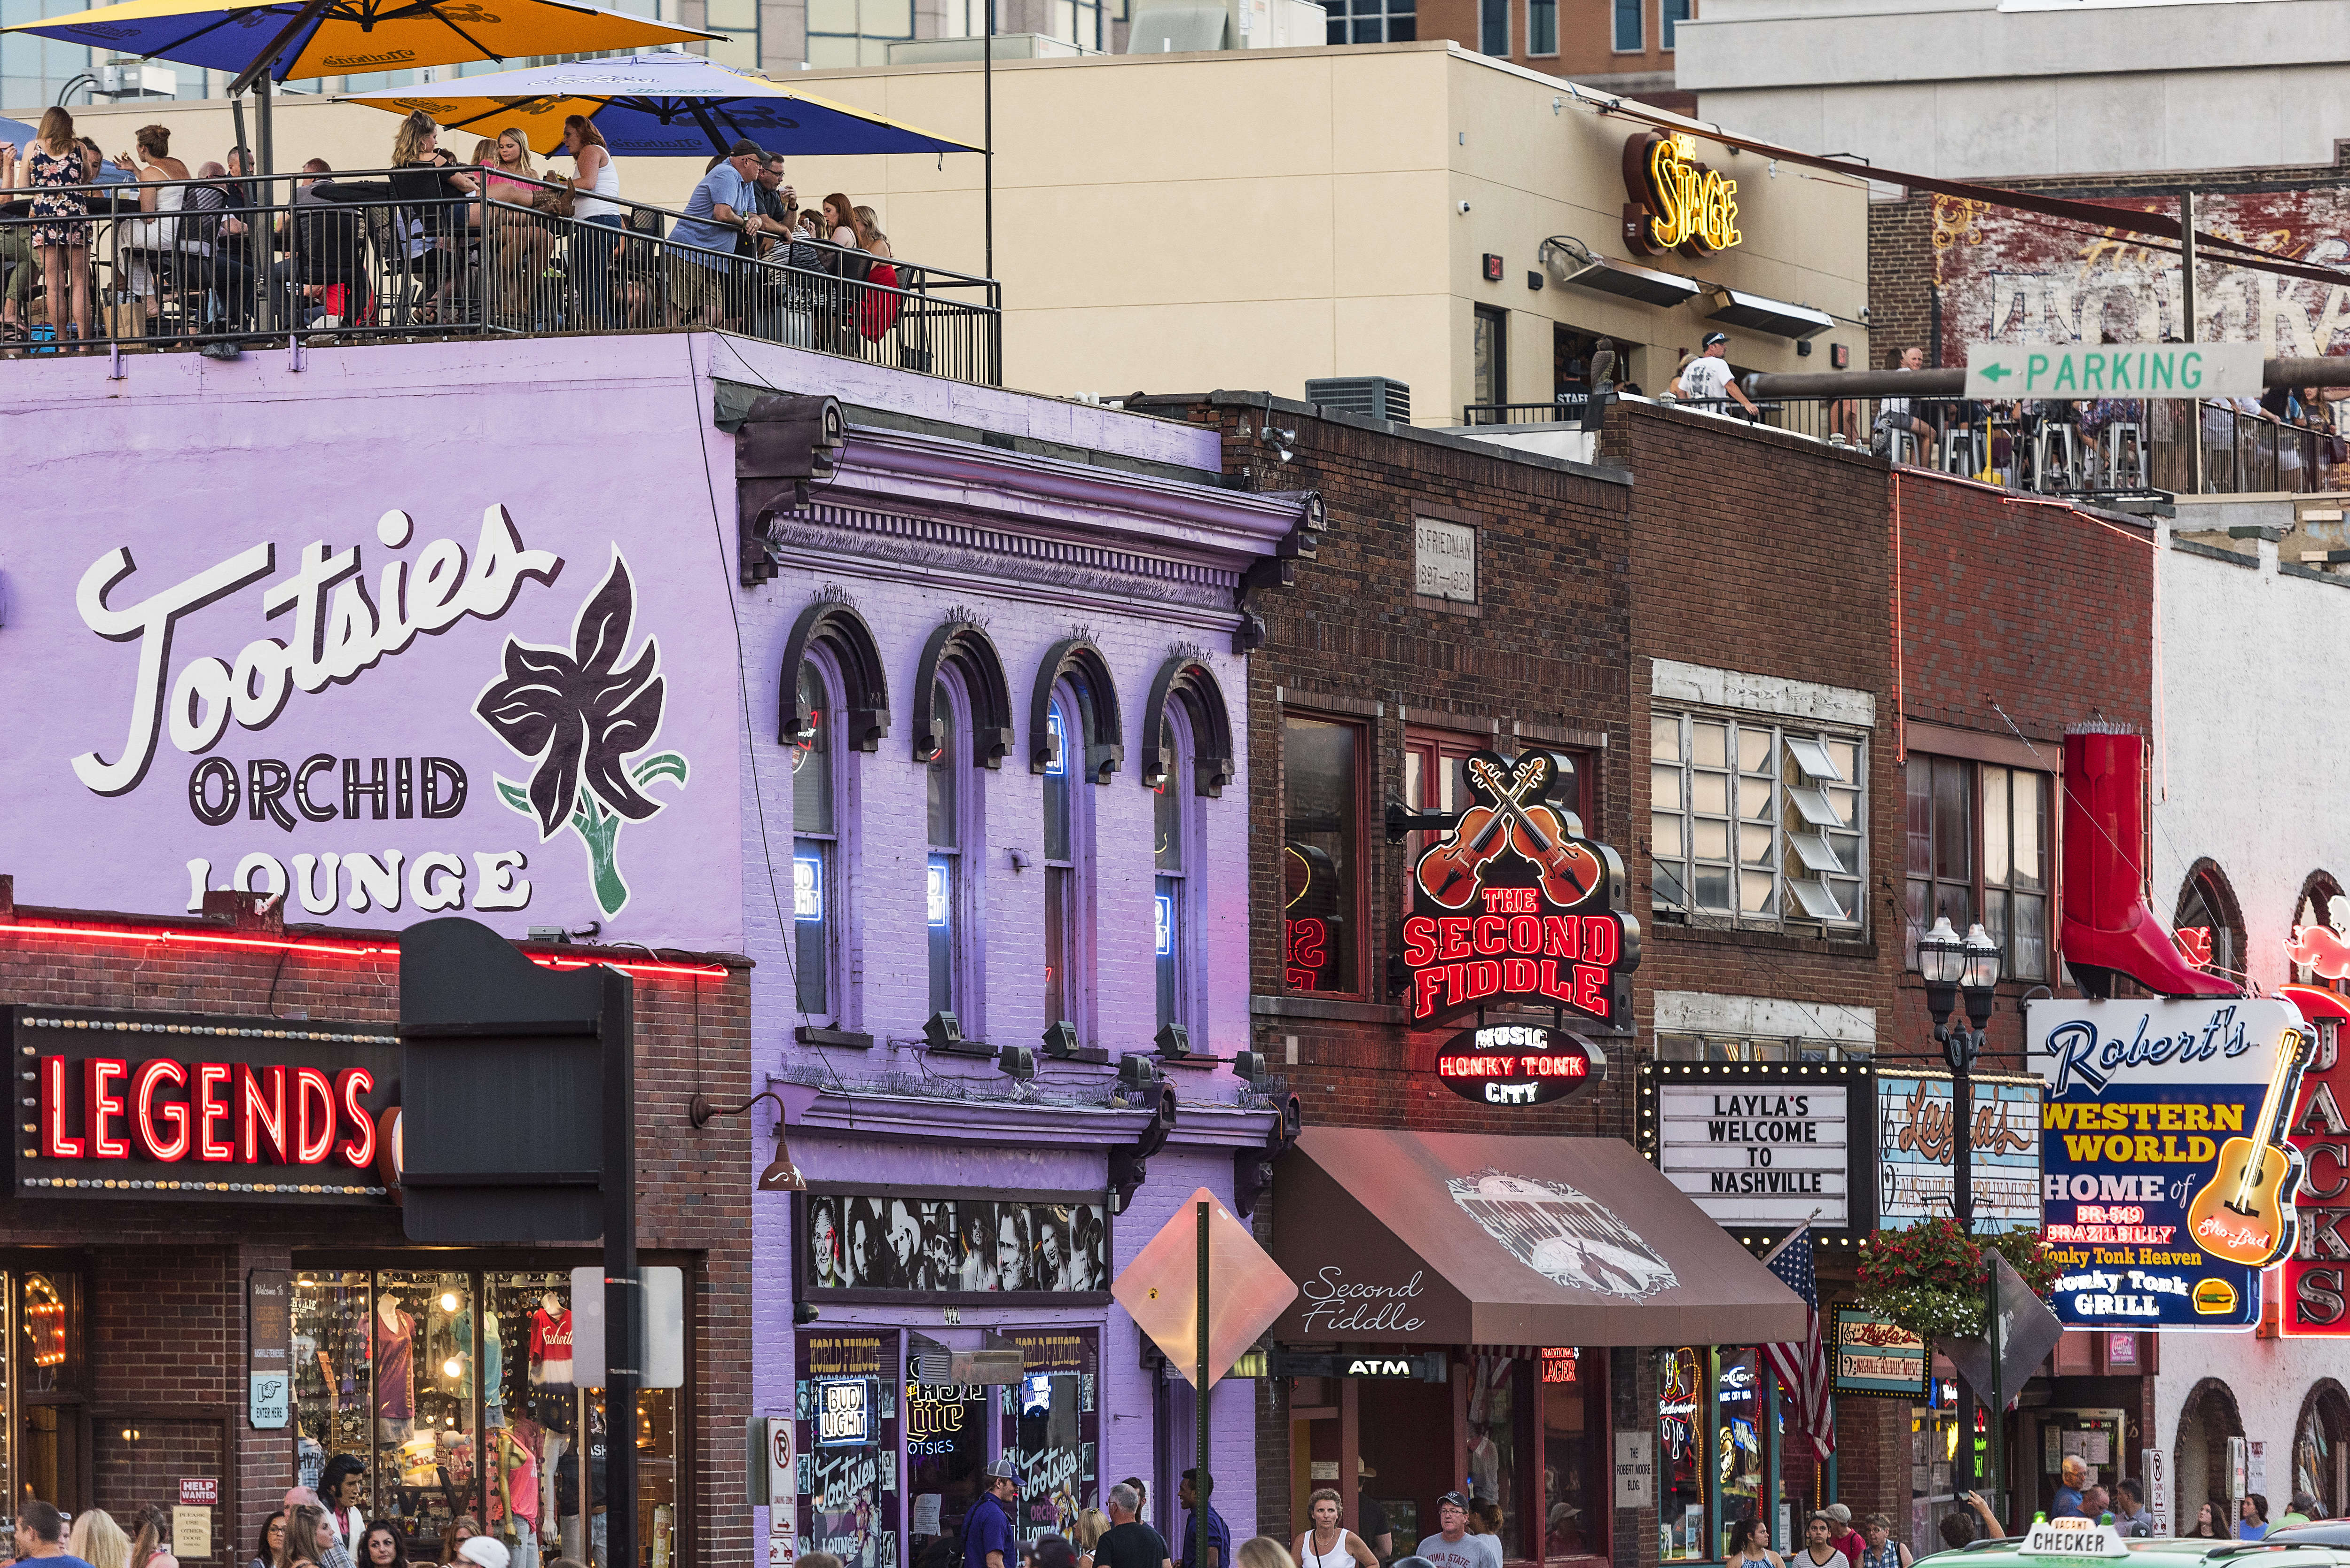 Country music bars on Broadway in Nashville, including the iconic Tootsies Orchid Lounge and Robert’s Western World